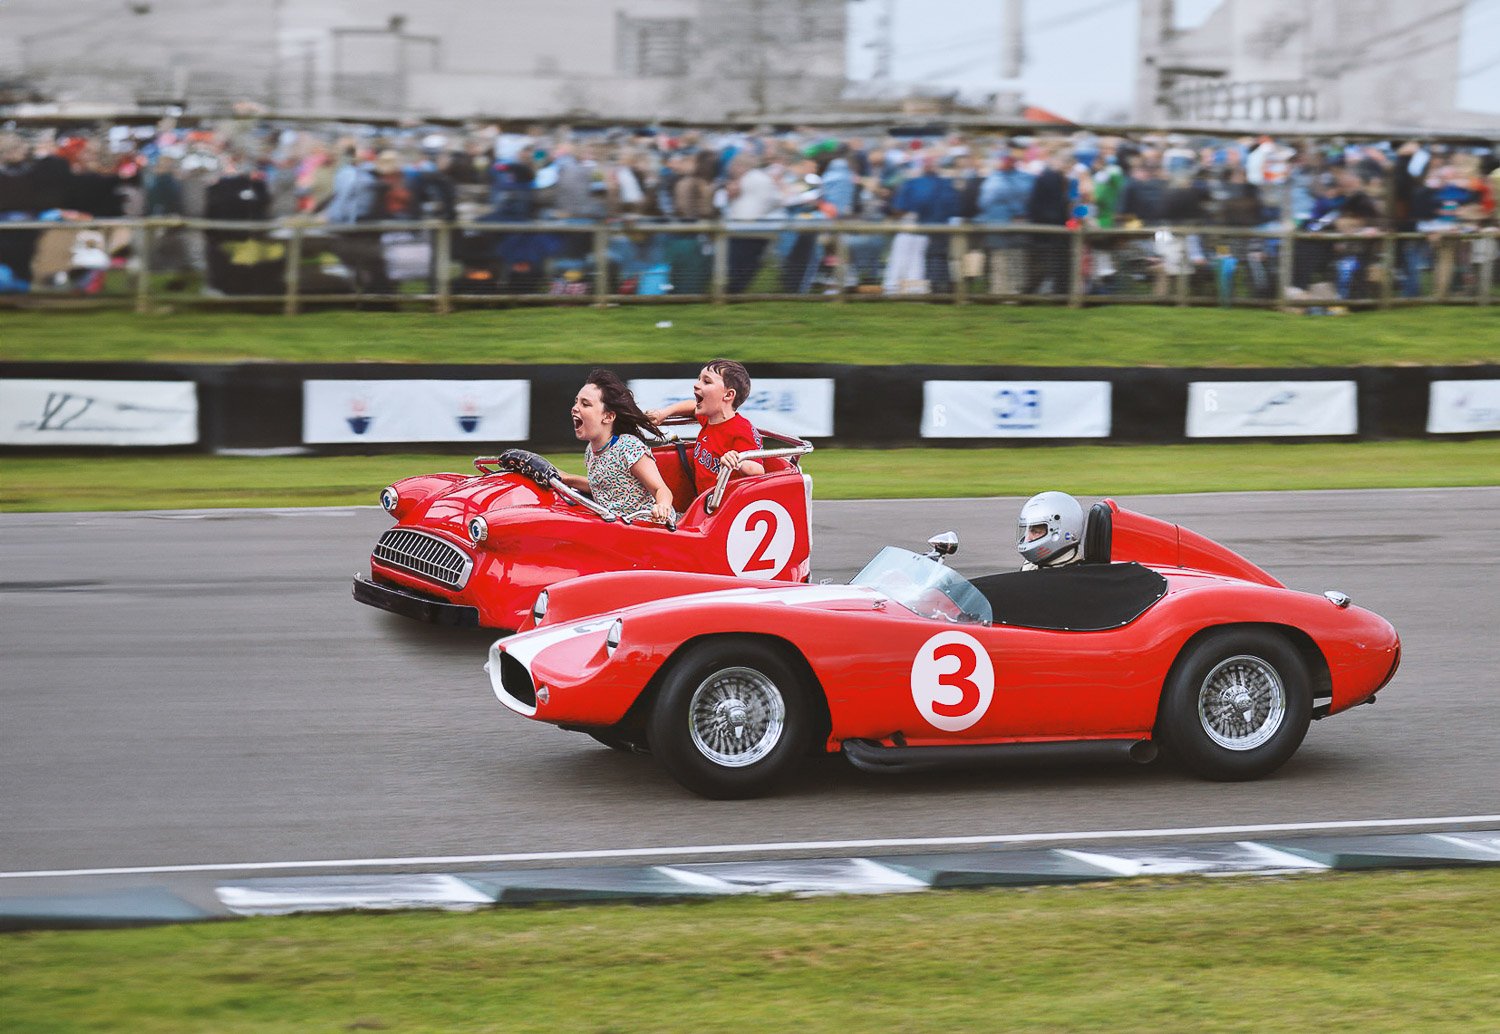 A boy and girl in a red racing car on race track